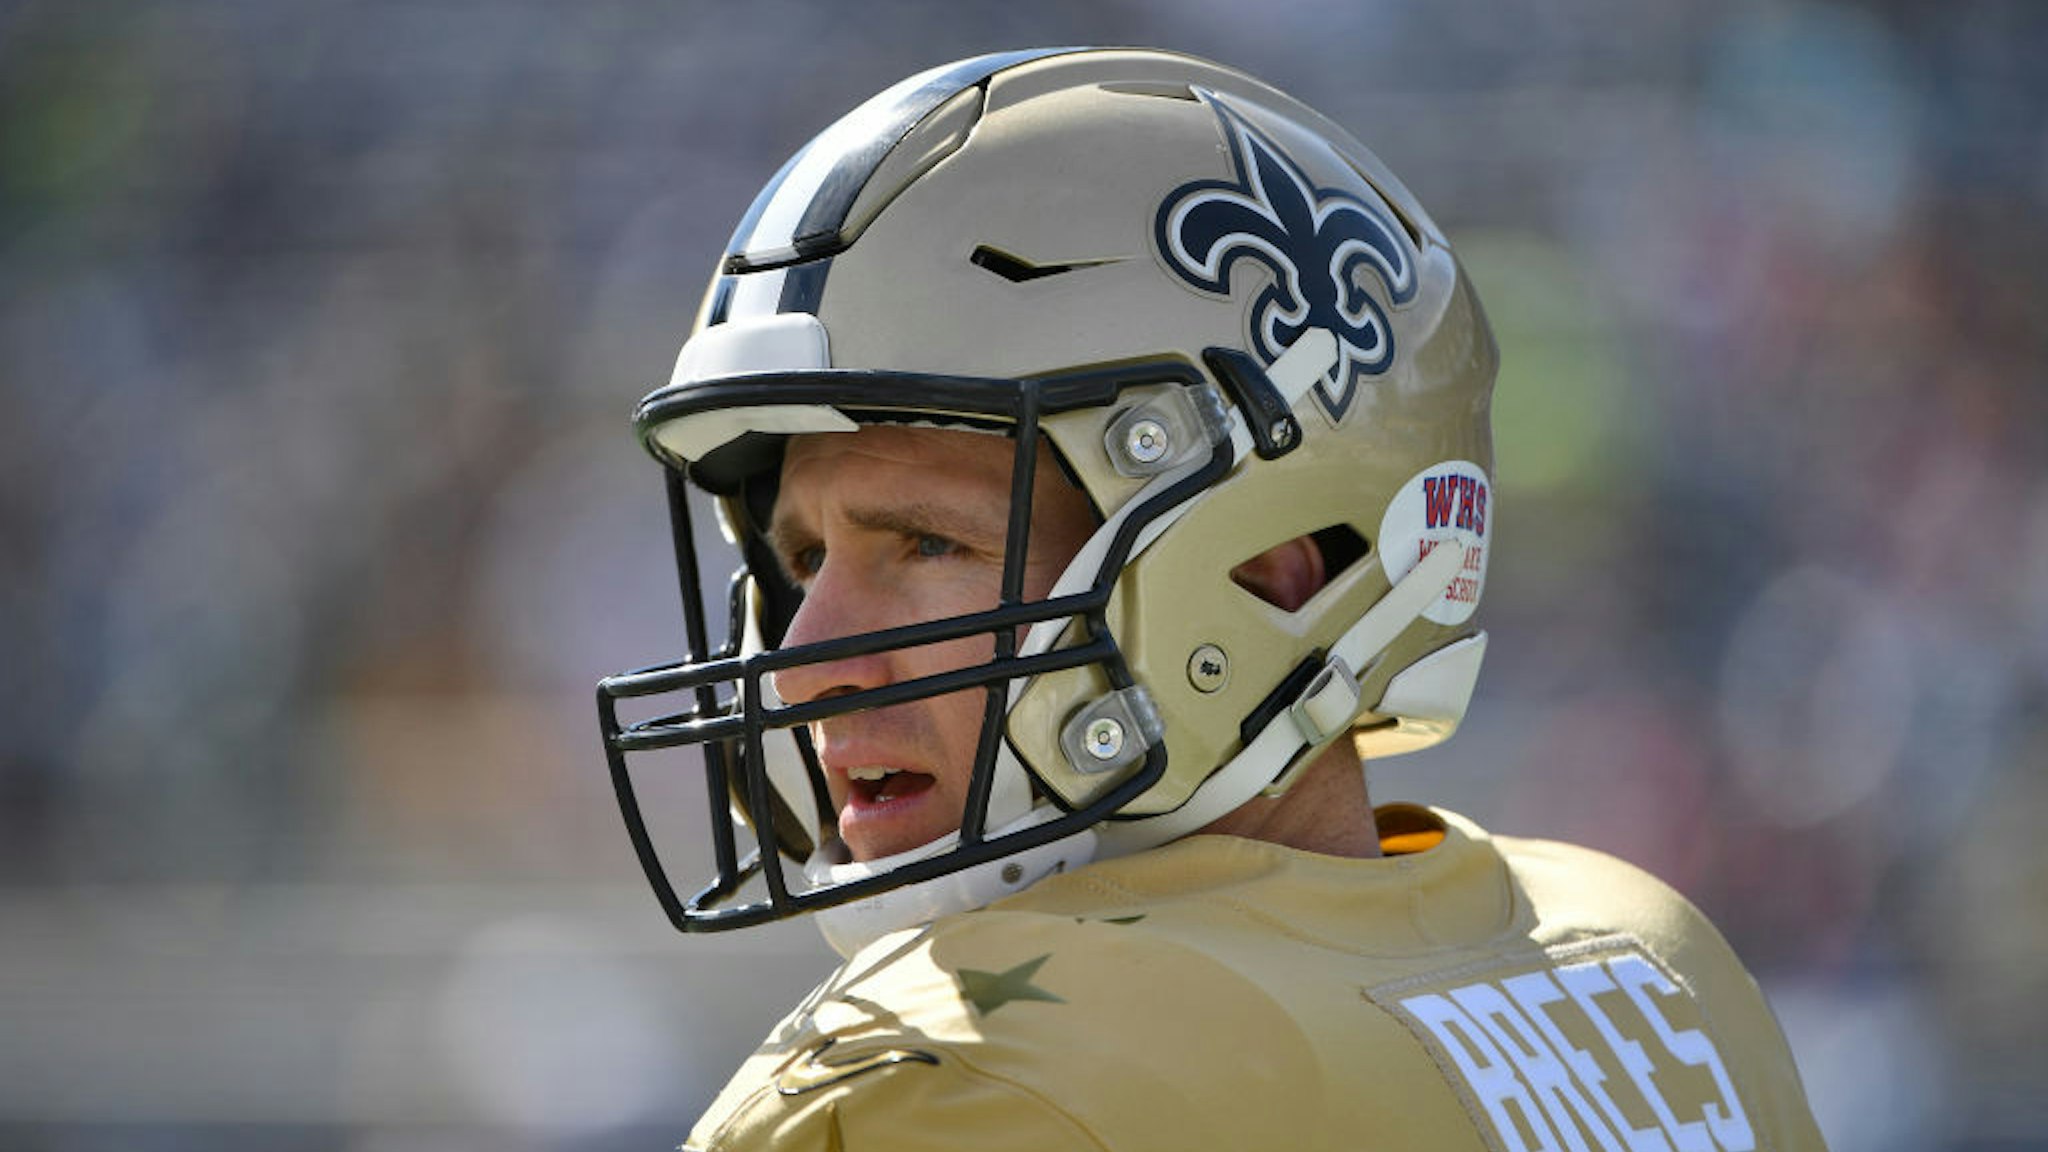 Drew Brees #9 of the New Orleans Saints warming up prior to the 2020 NFL Pro Bowl at Camping World Stadium on January 26, 2020 in Orlando, Florida. (Photo by Mark Brown/Getty Images)